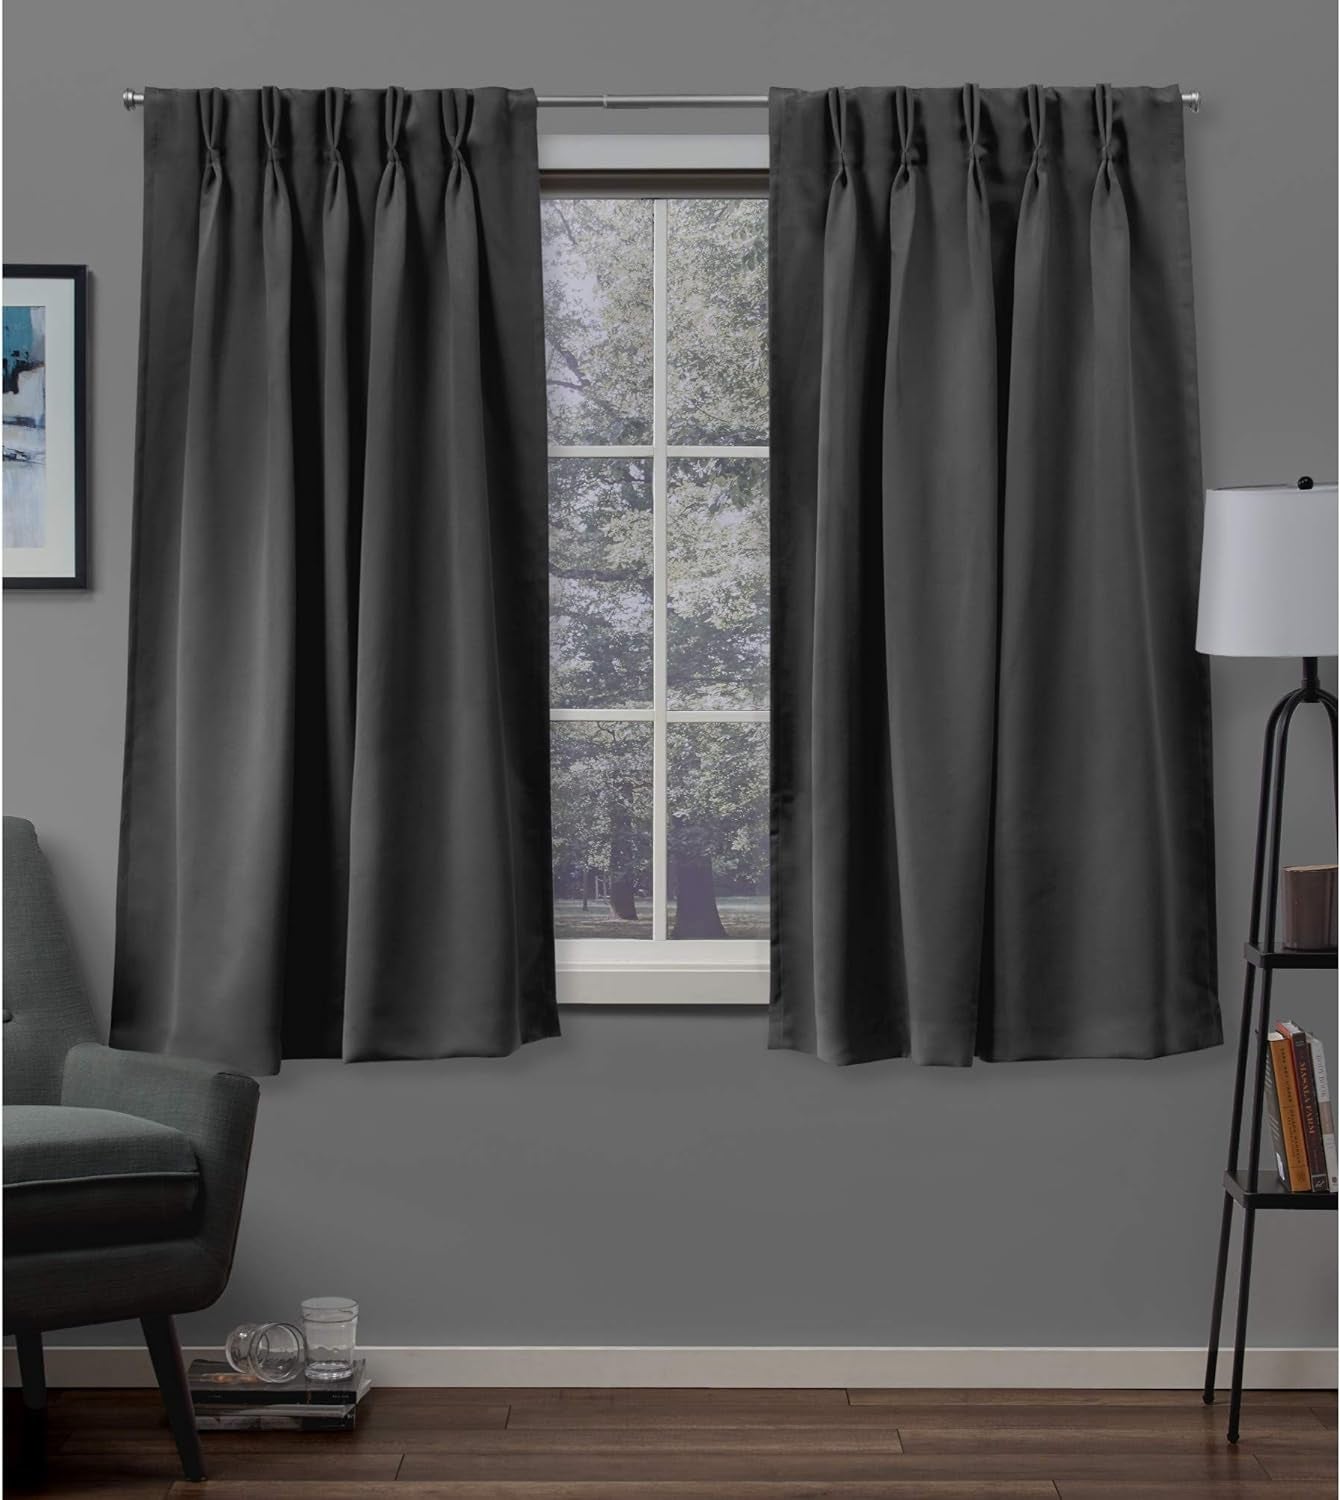 Exclusive Home Sateen Twill Woven Room Darkening Blackout Pinch Pleat/Hidden Tab Top Curtain Panel Pair, 63" Length, Charcoal  Exclusive Home Curtains Charcoal 63" Length 